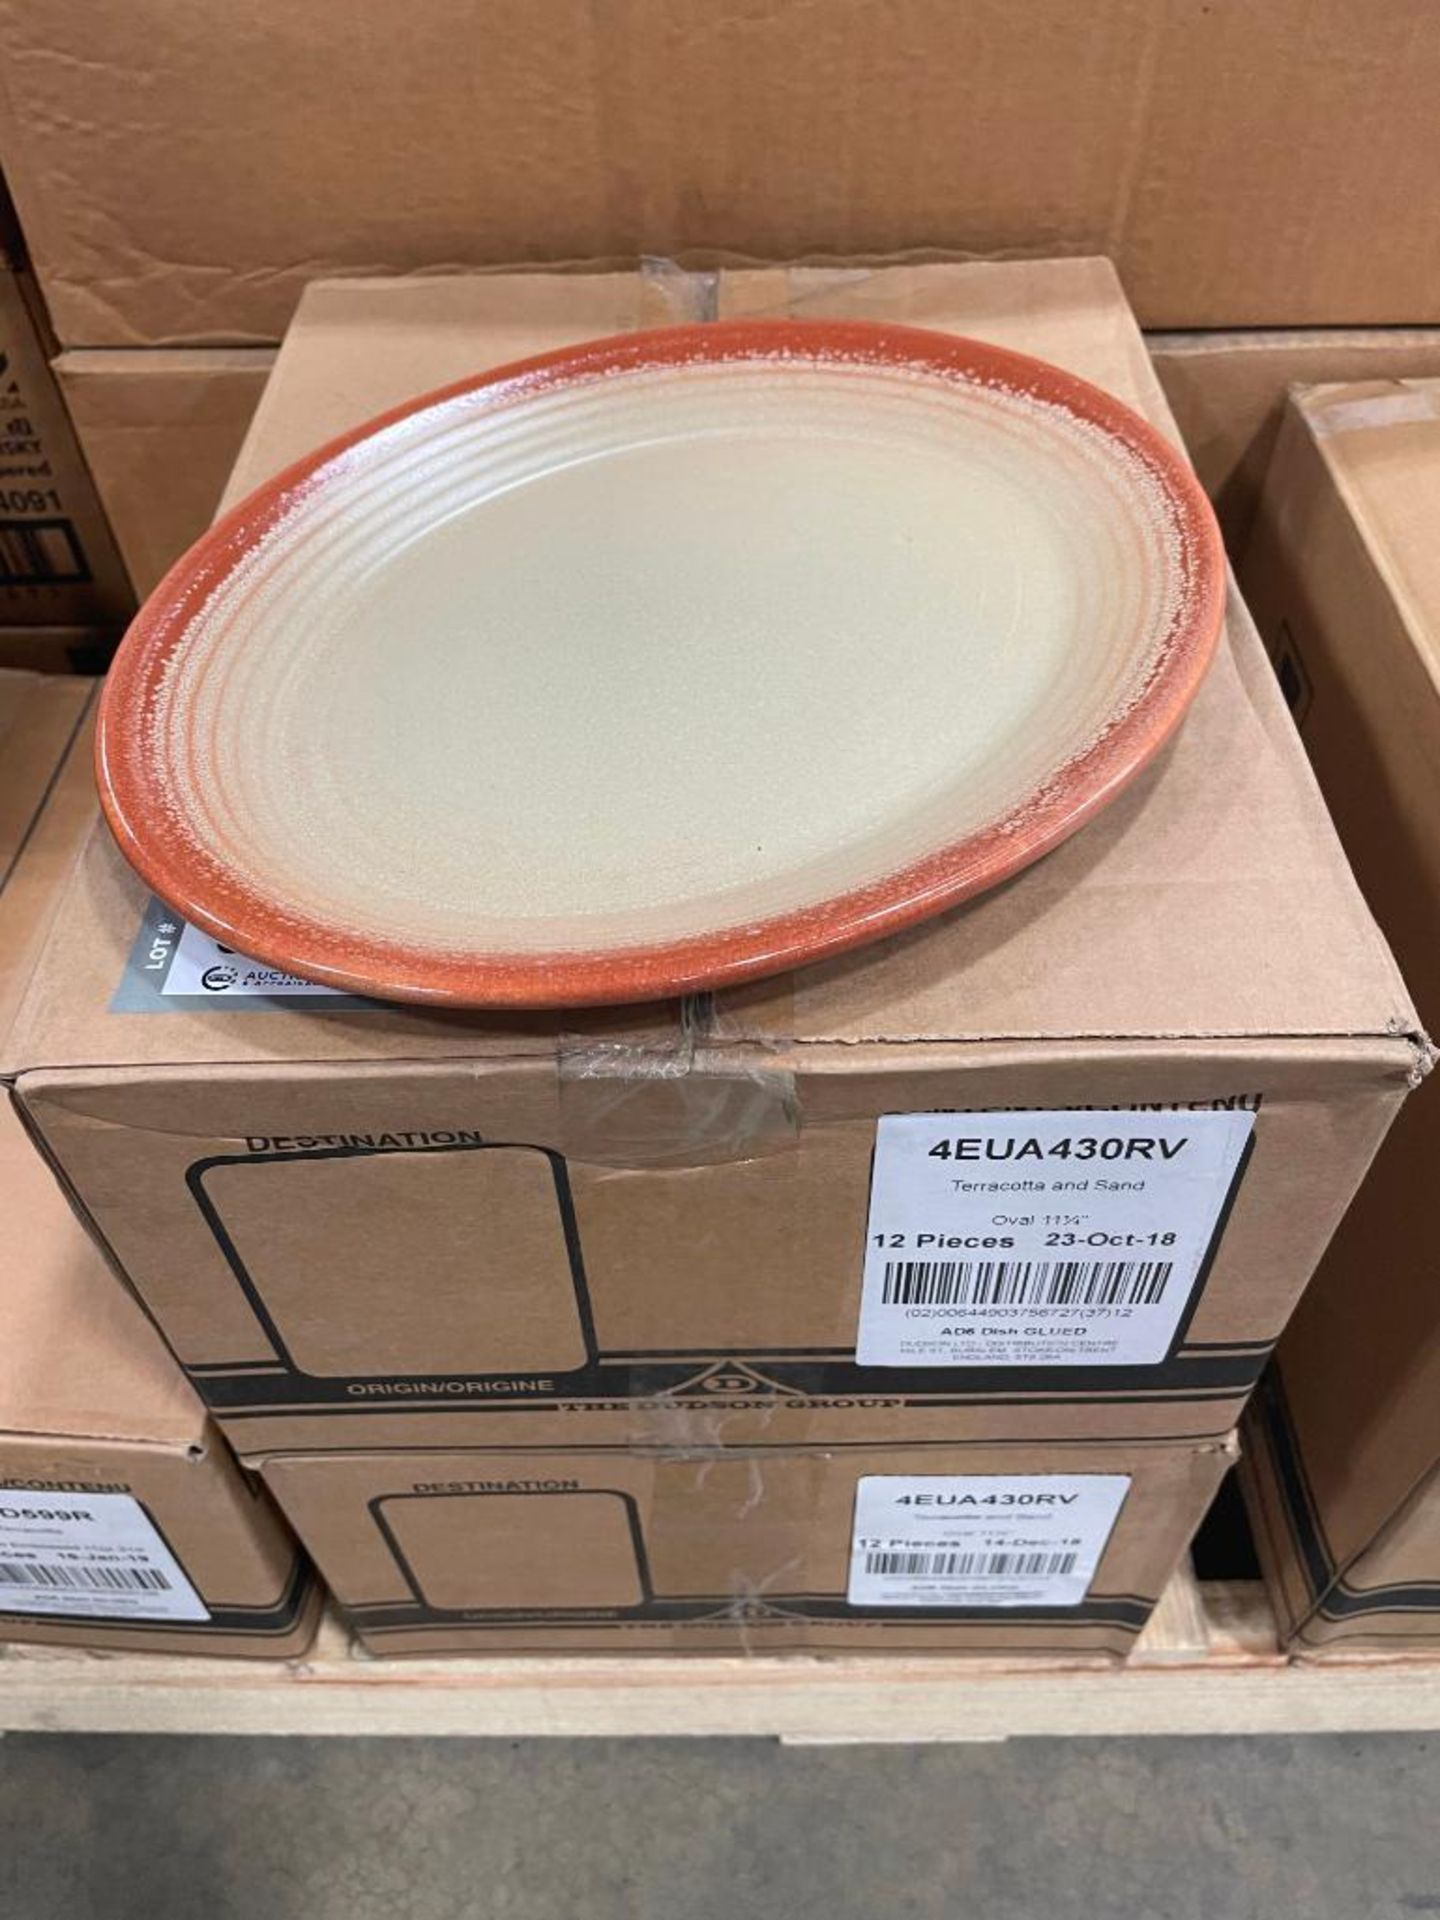 2 CASES OF DUDSON TERRACOTTA & SAND 11 1/4" OVAL PLATE - 12/CASE, MADE IN ENGLAND